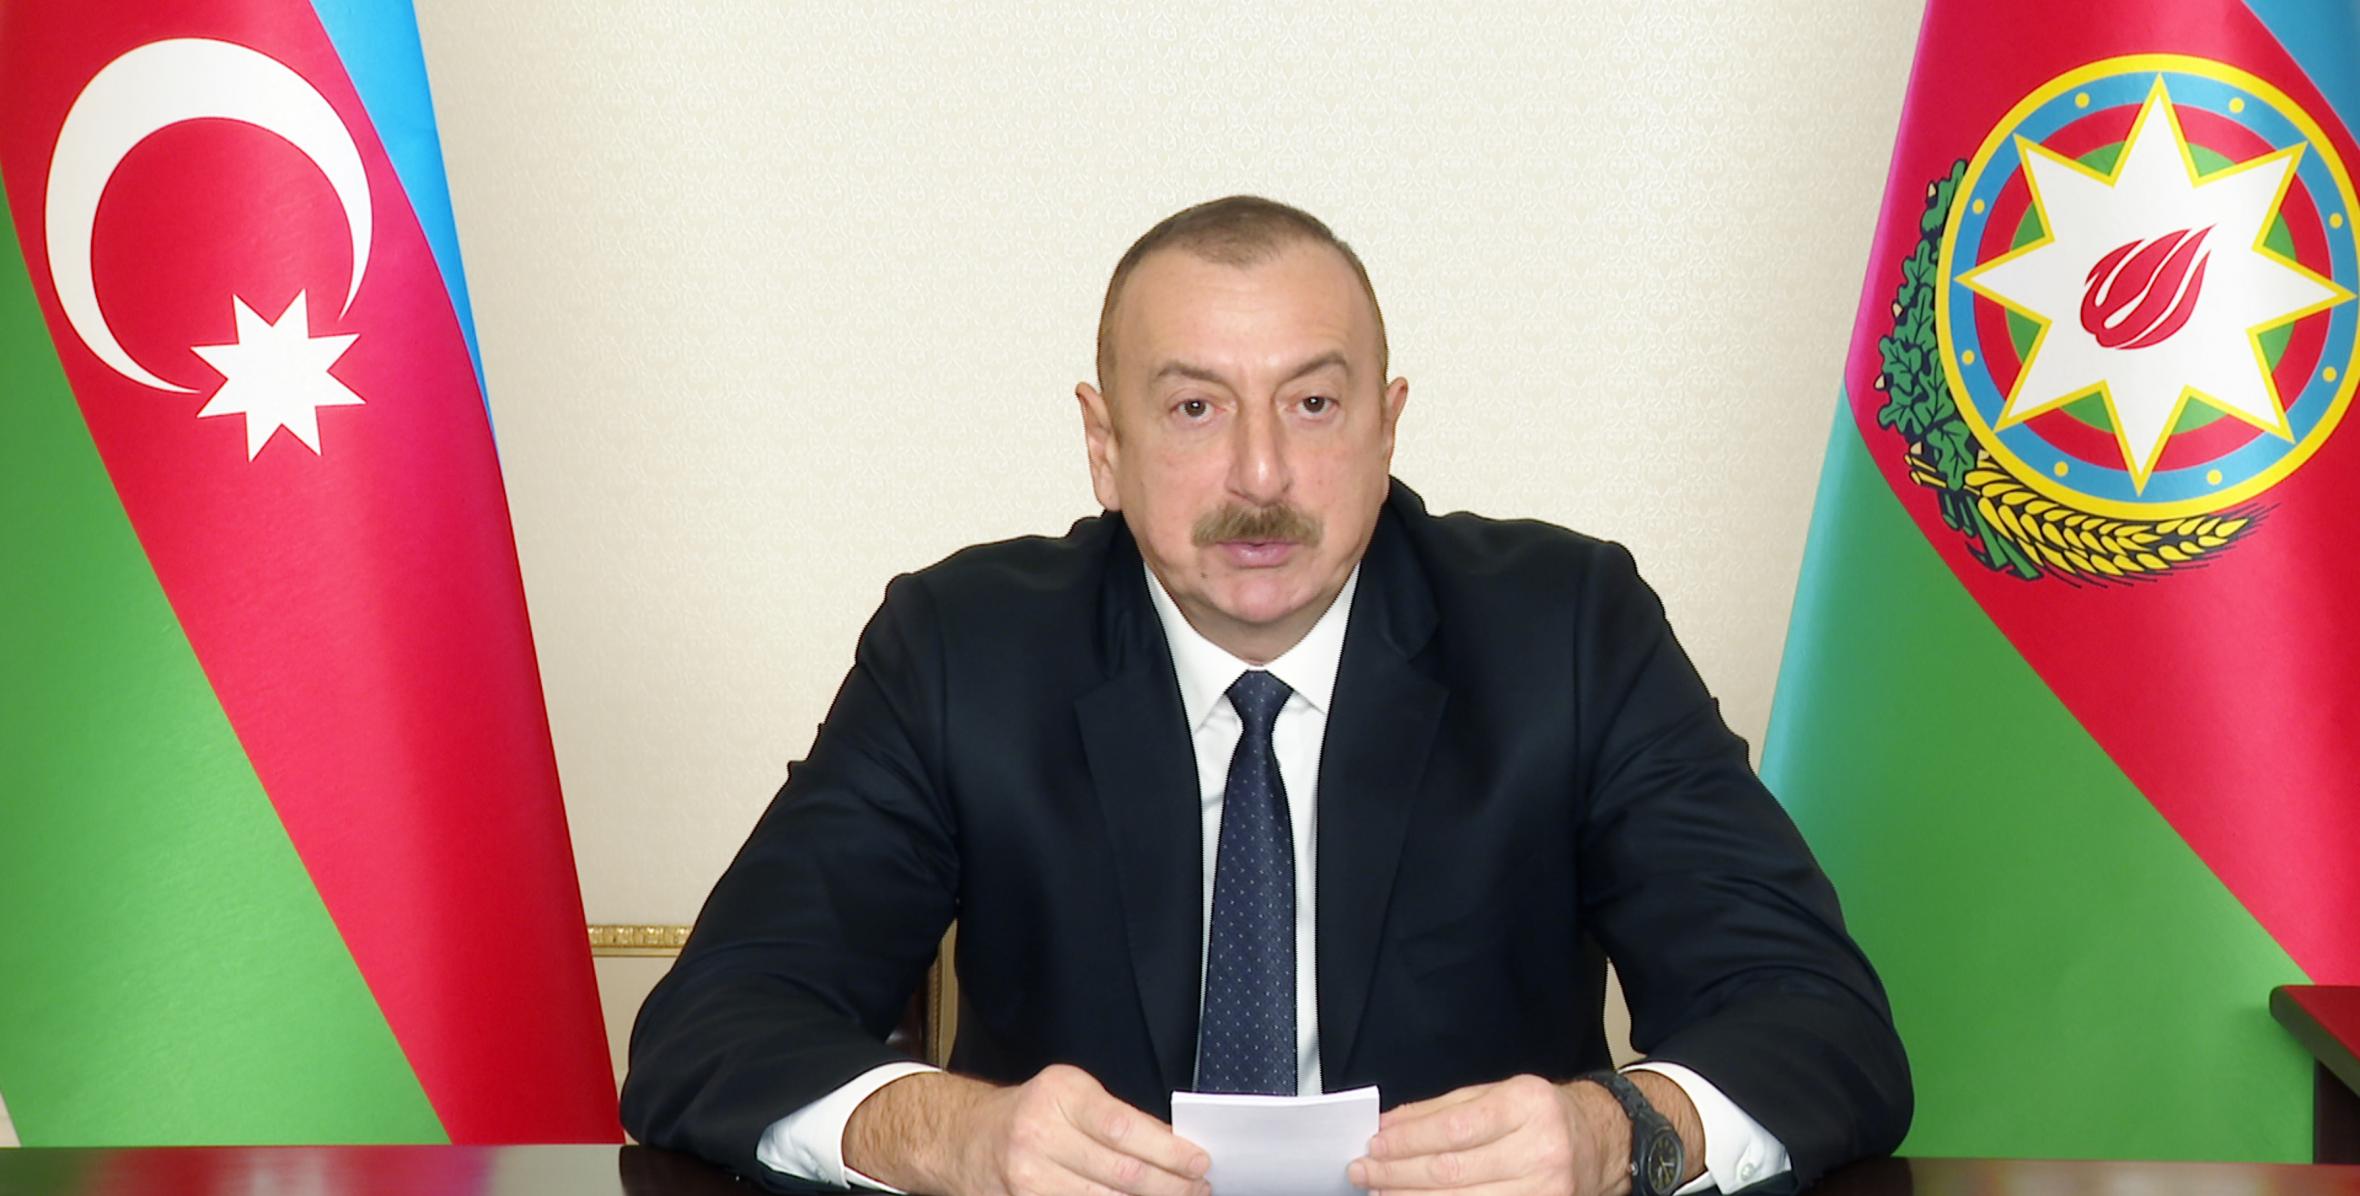 Ilham Aliyev attended CIS Heads of State Council's session in video conference format